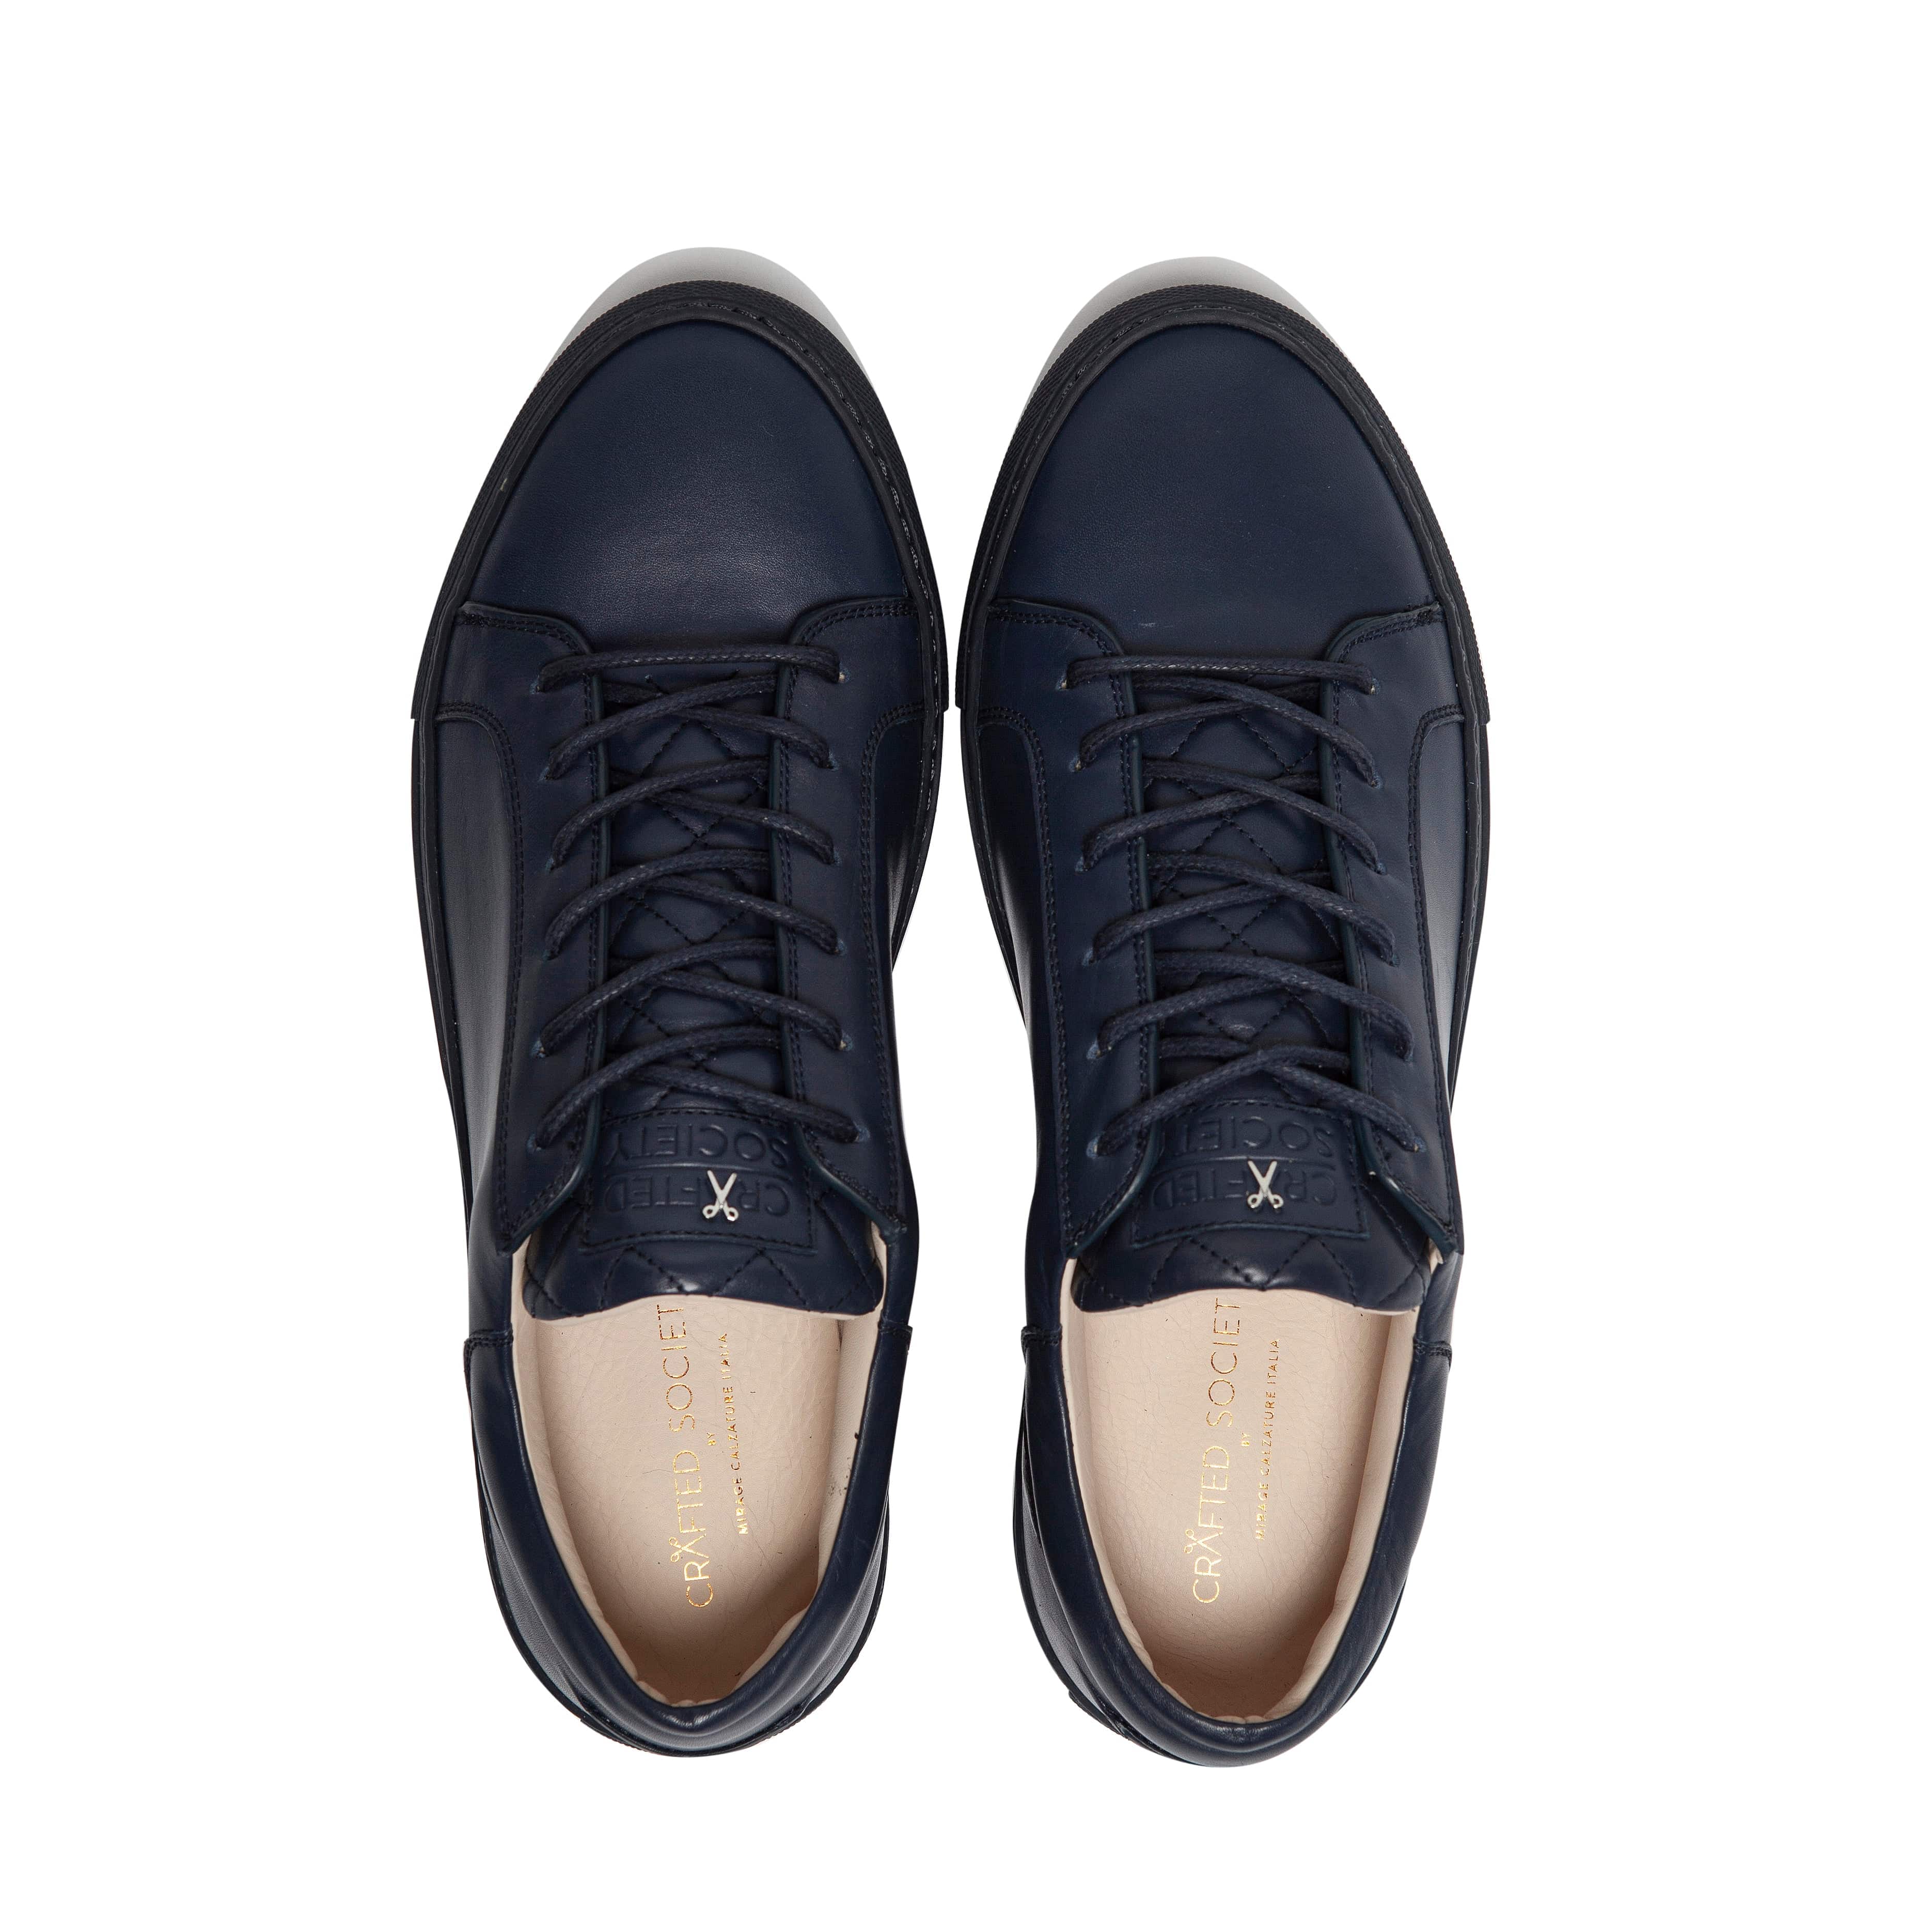 Mario Low Refined Sneaker | Petrol Blue Nappa Leather | Navy Outsole | Made in Italy